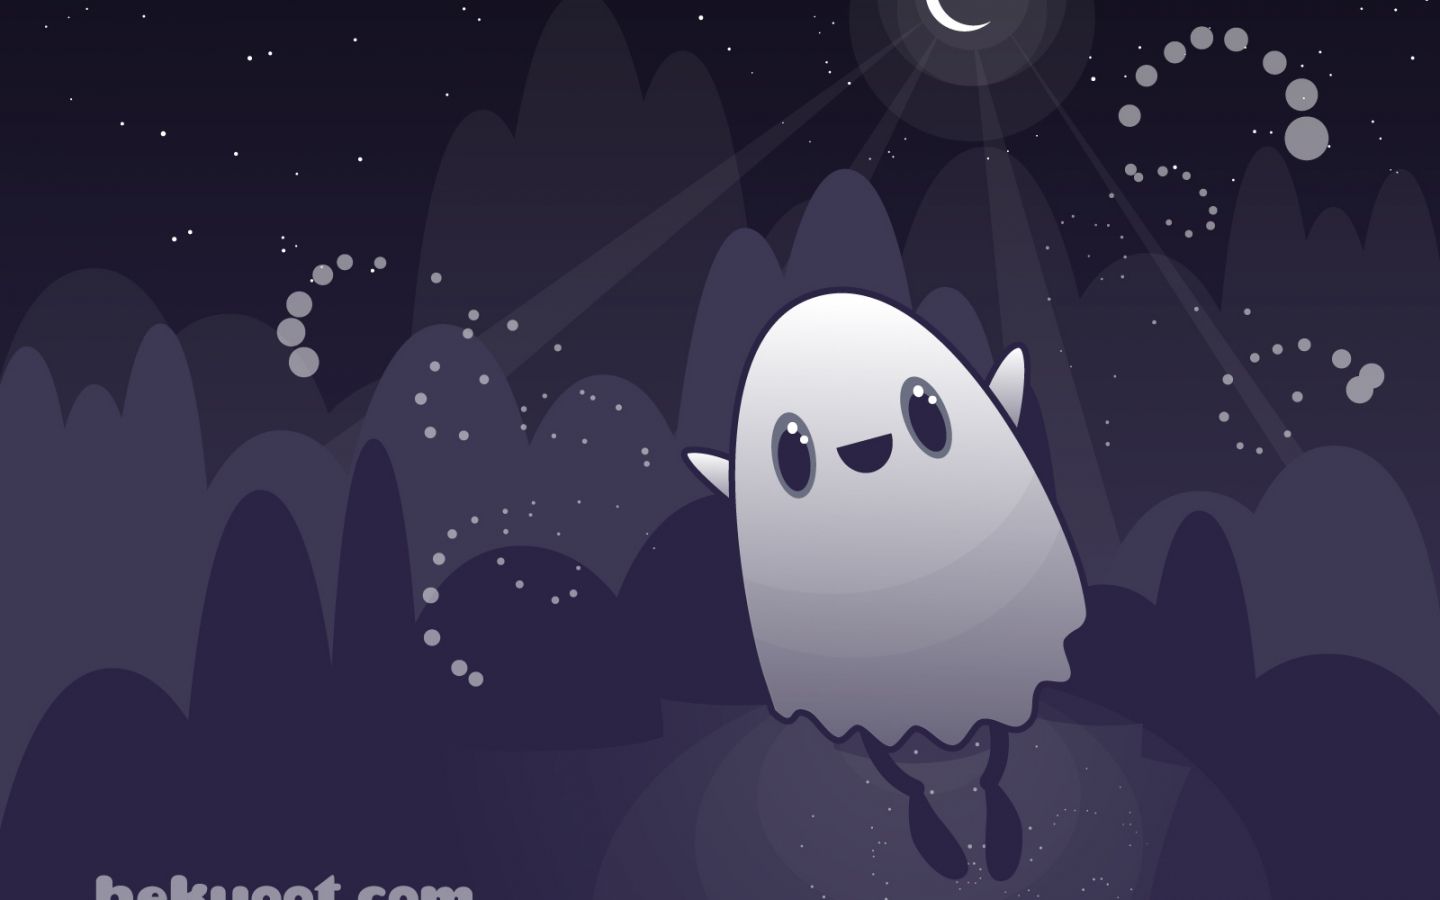 Free download Cute Ghost Wallpaper Bu the ghosts night flight [1600x1200] for your Desktop, Mobile & Tablet. Explore Cute Ghost Wallpaper. Cute Halloween Desktop Wallpaper, Ghost Wallpaper Free Download